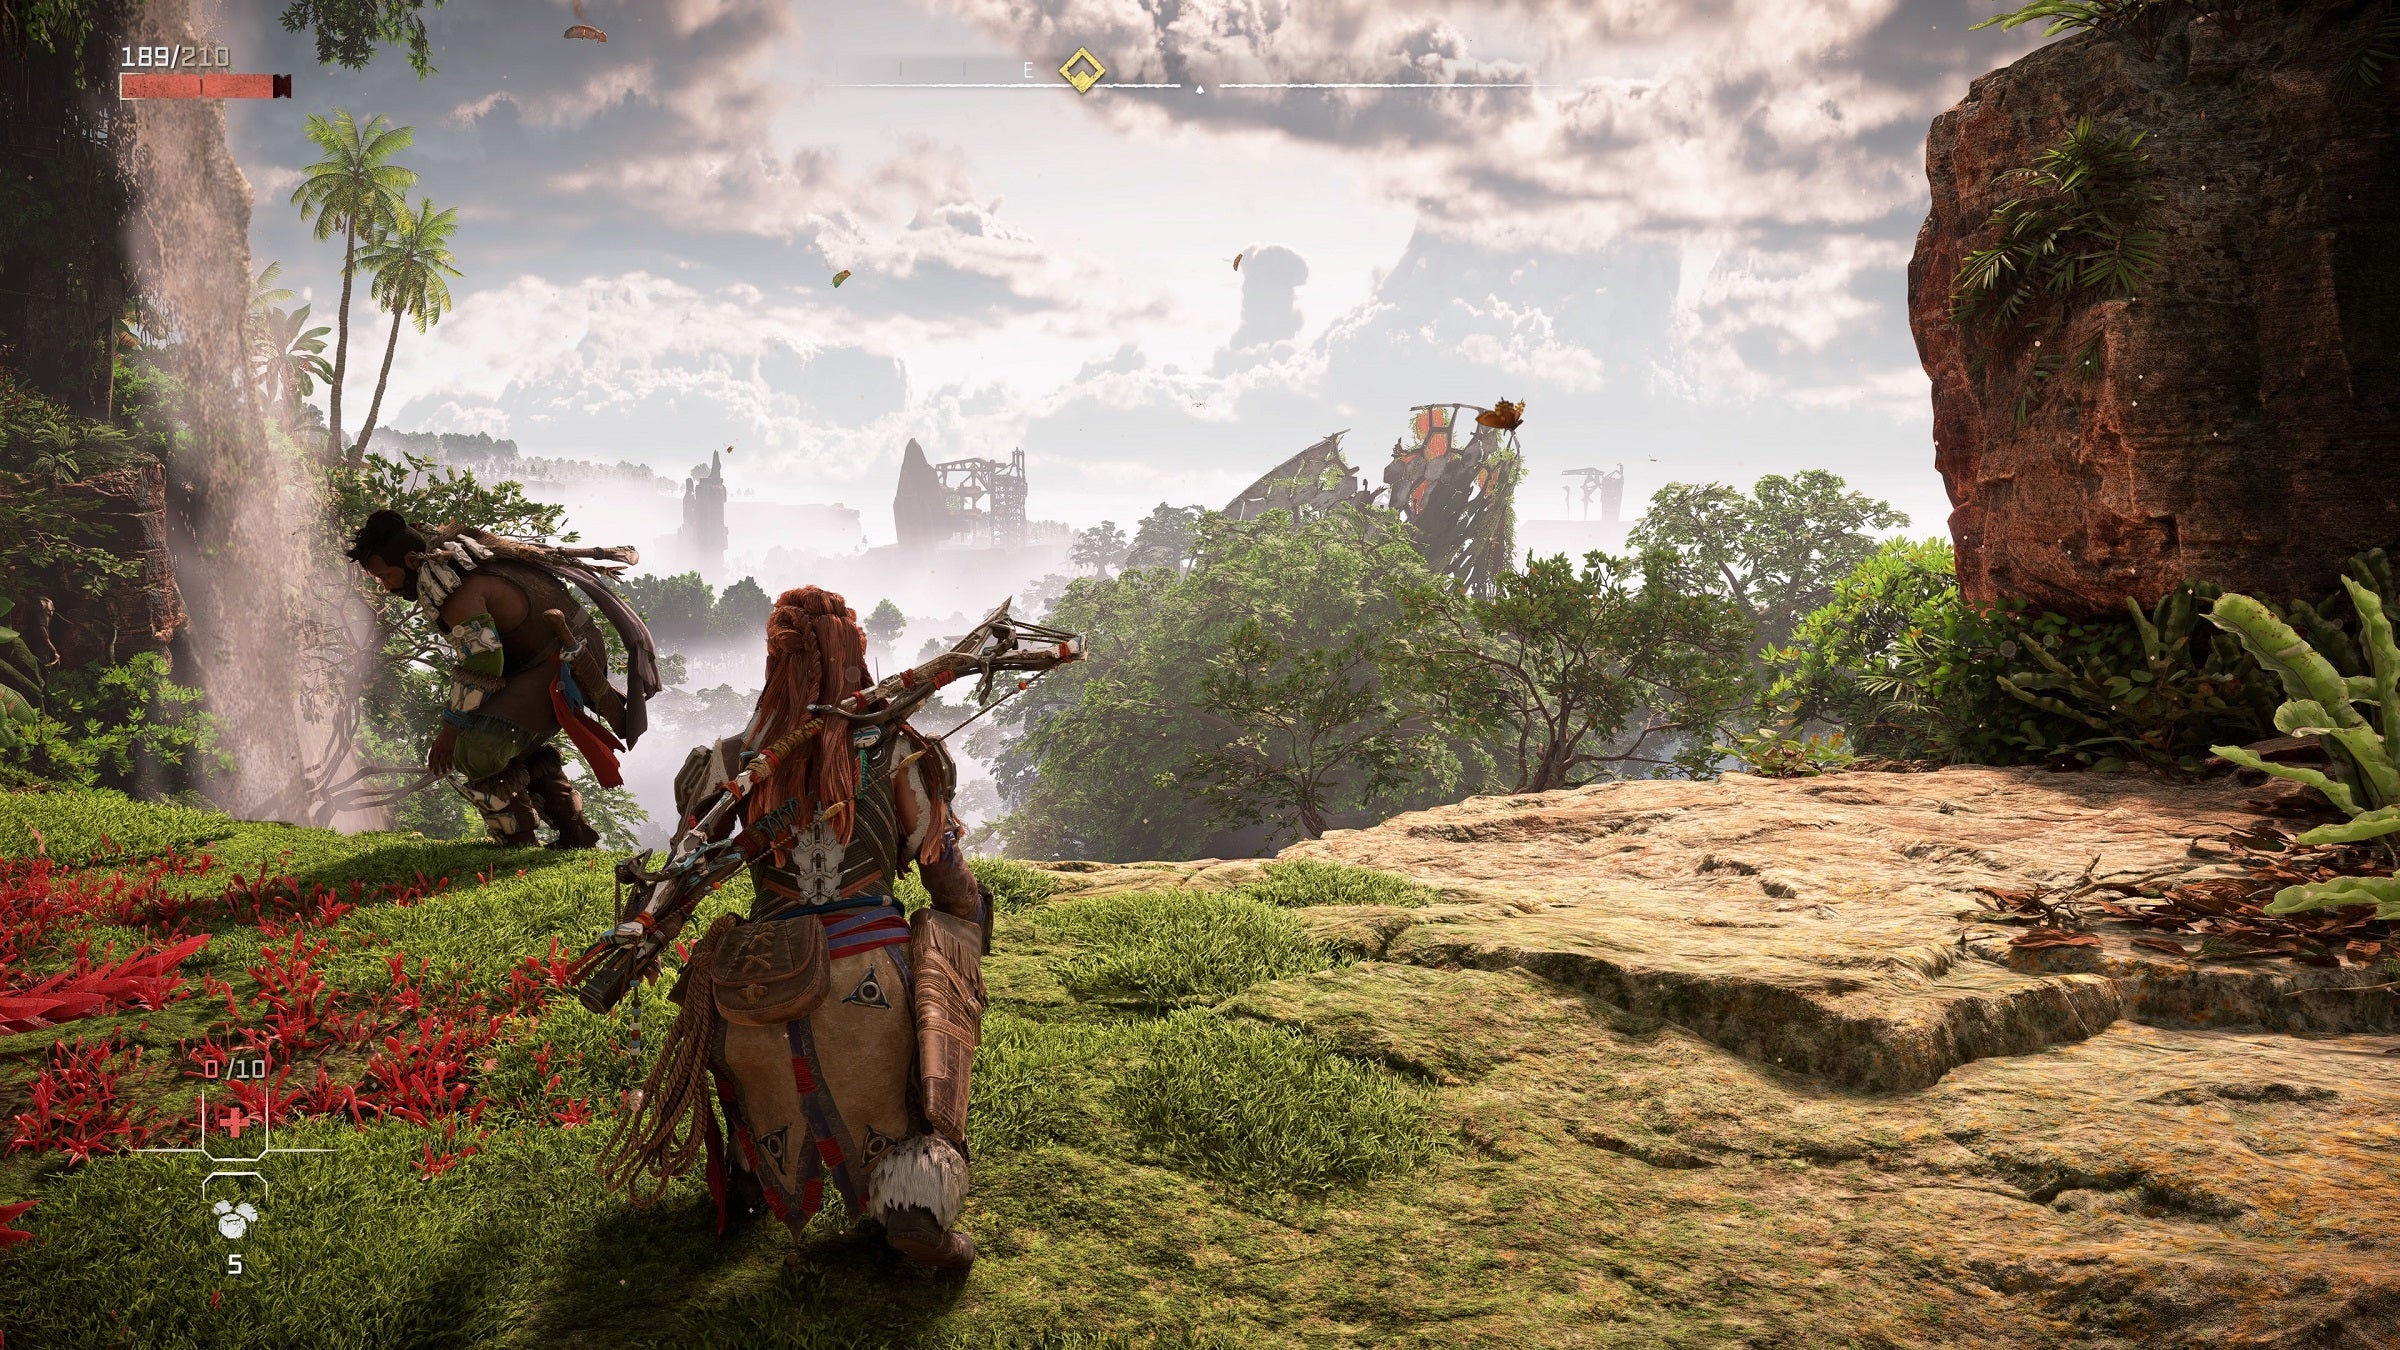 You can make out more detail in the ruins off in the distance on PS5 in graphics mode, but the differences are pretty subtle.  (Screenshot: Guerrilla Games / Sony / Kotaku)